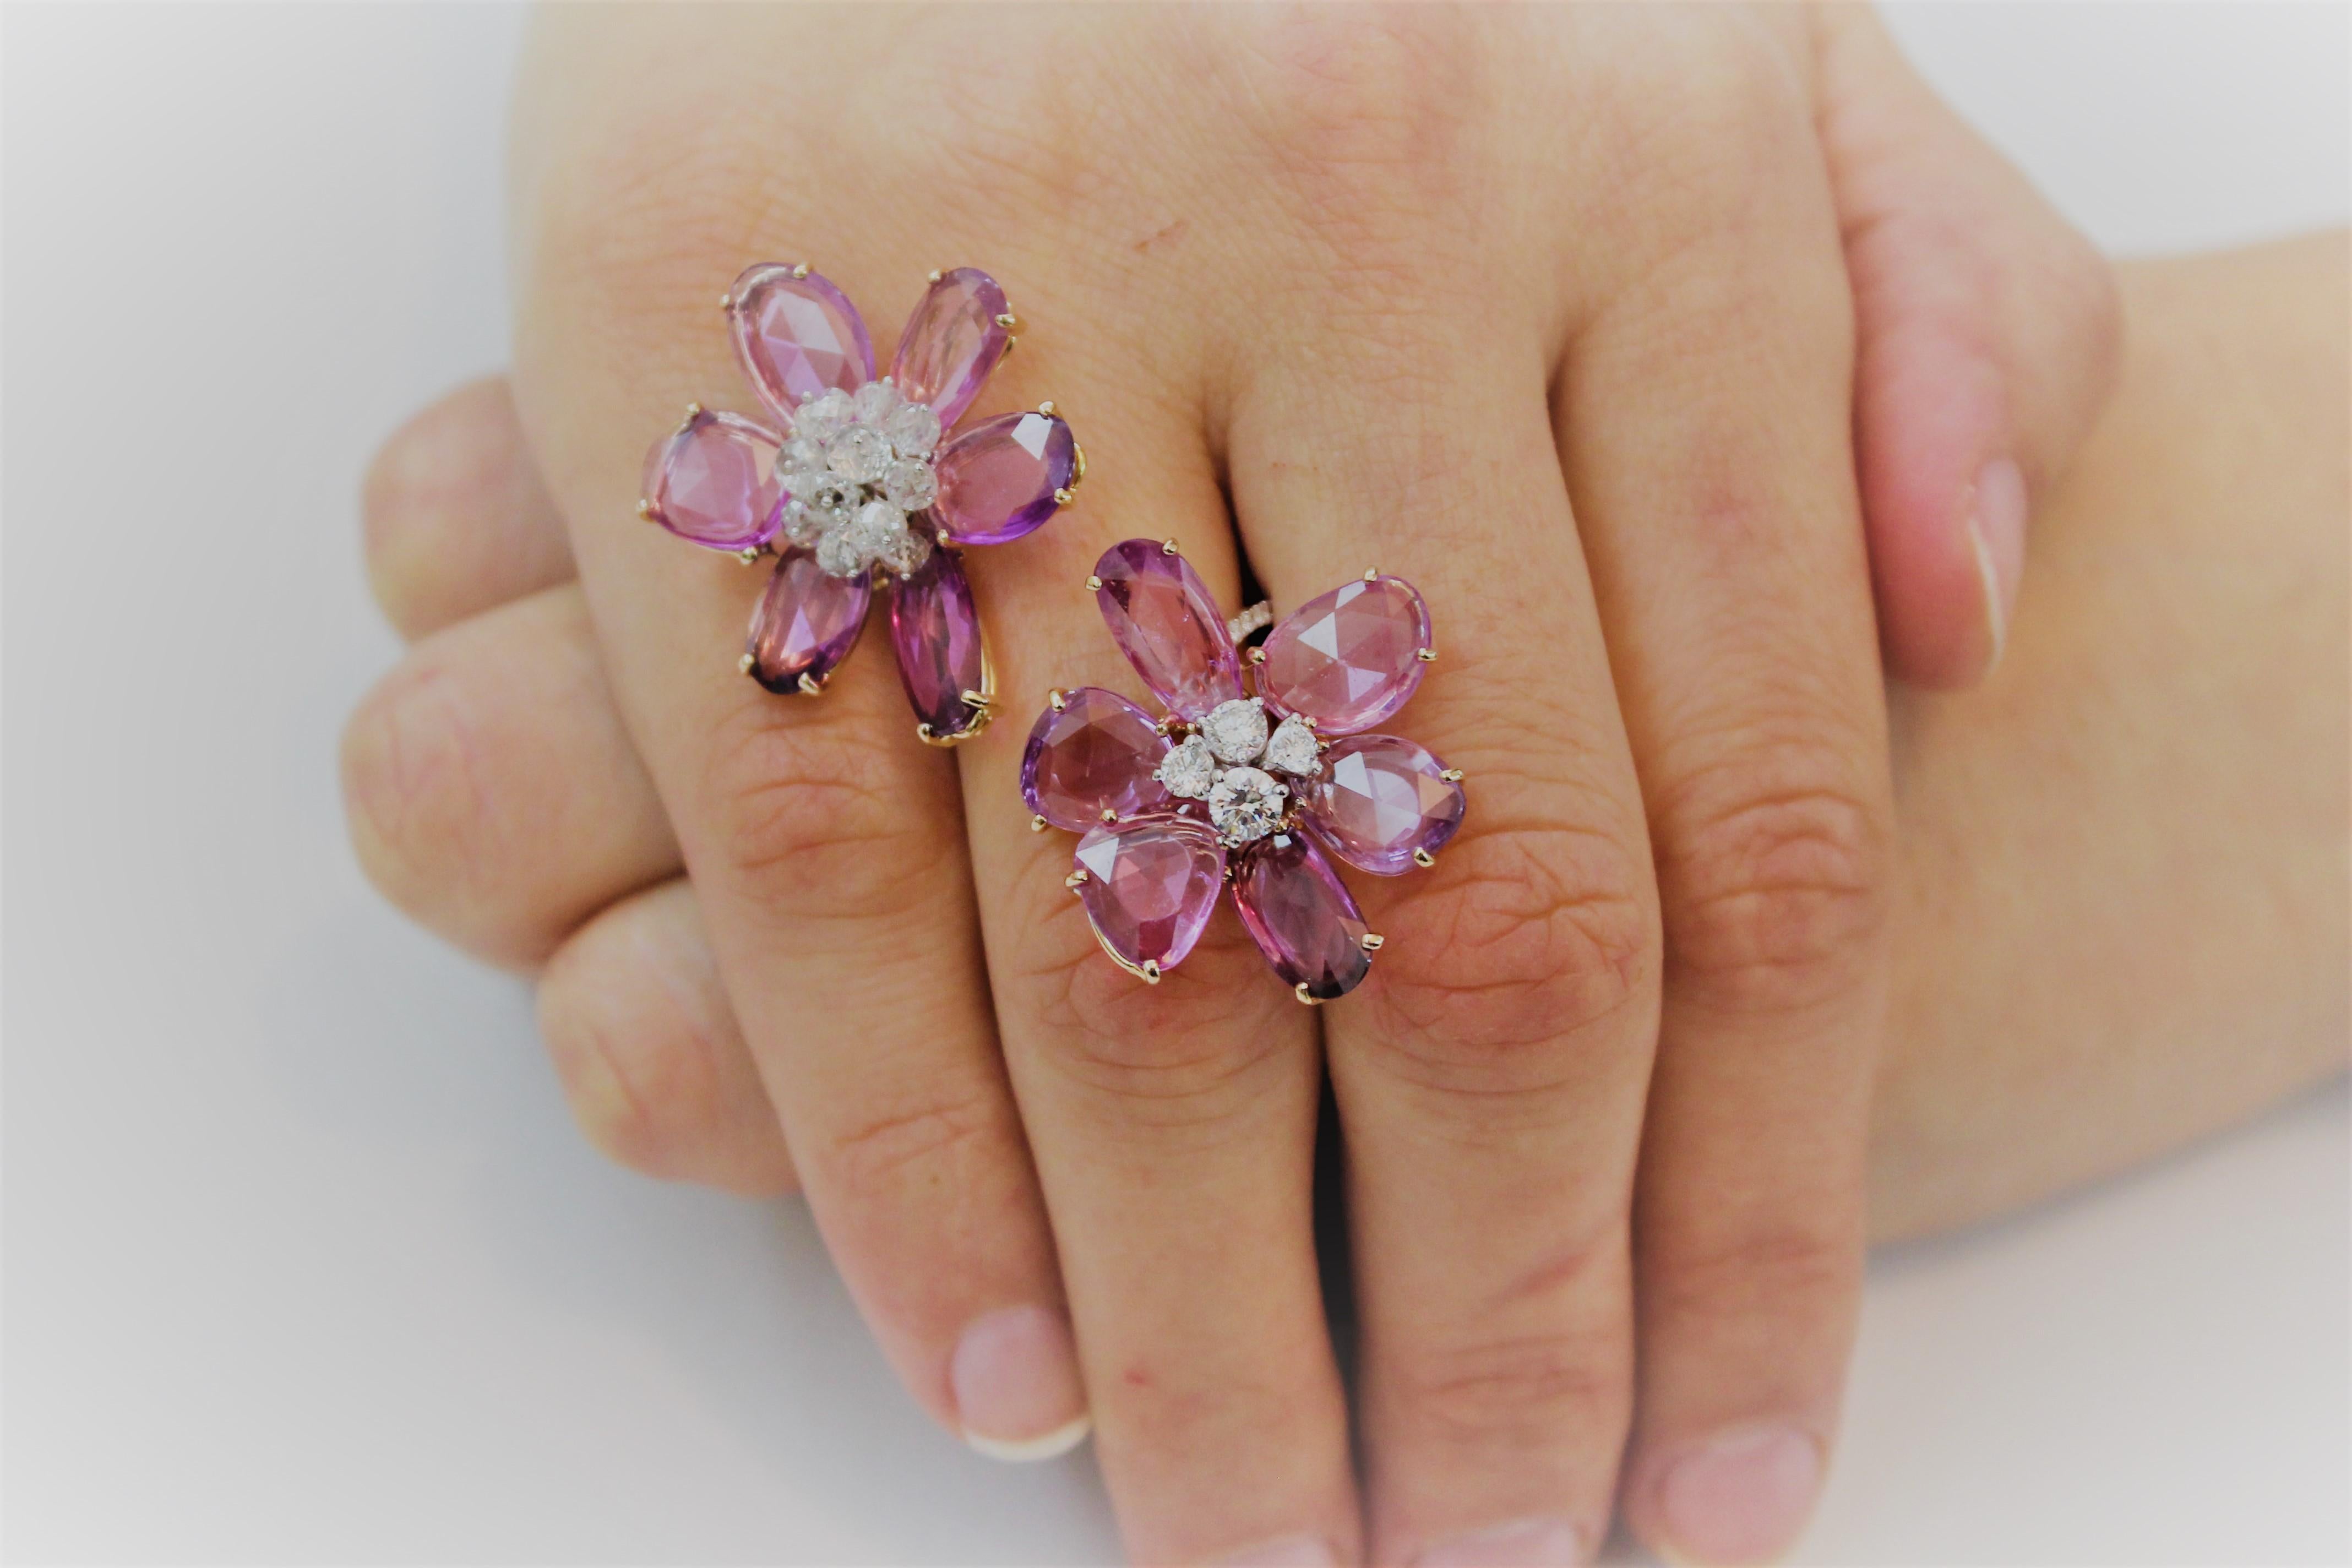 Feminine and Delicate Double Flower Cocktail Ring composed by Rosecut Pink Sapphires for 18.22 Carat Total and White Diamond Pistils for 4.14 Carat Total. 
One Pink Sapphire Rosecut Flower has a Pistil of White Round Diamonds, the other flower has a